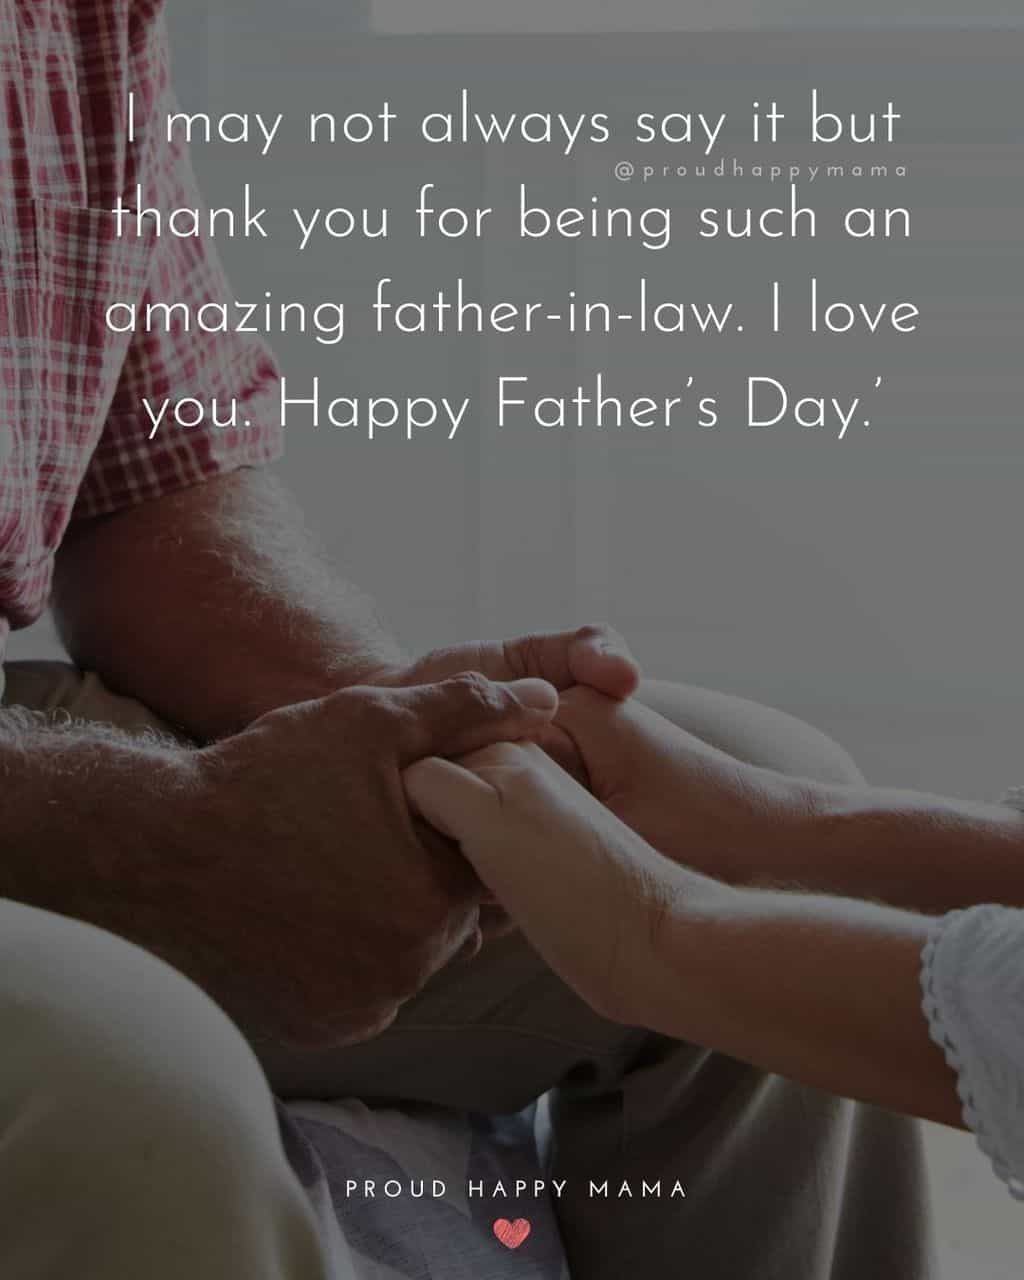 Happy Fathers Day Quotes For Father In Law - I may not always say it but thank you for being such an amazing father in law. I